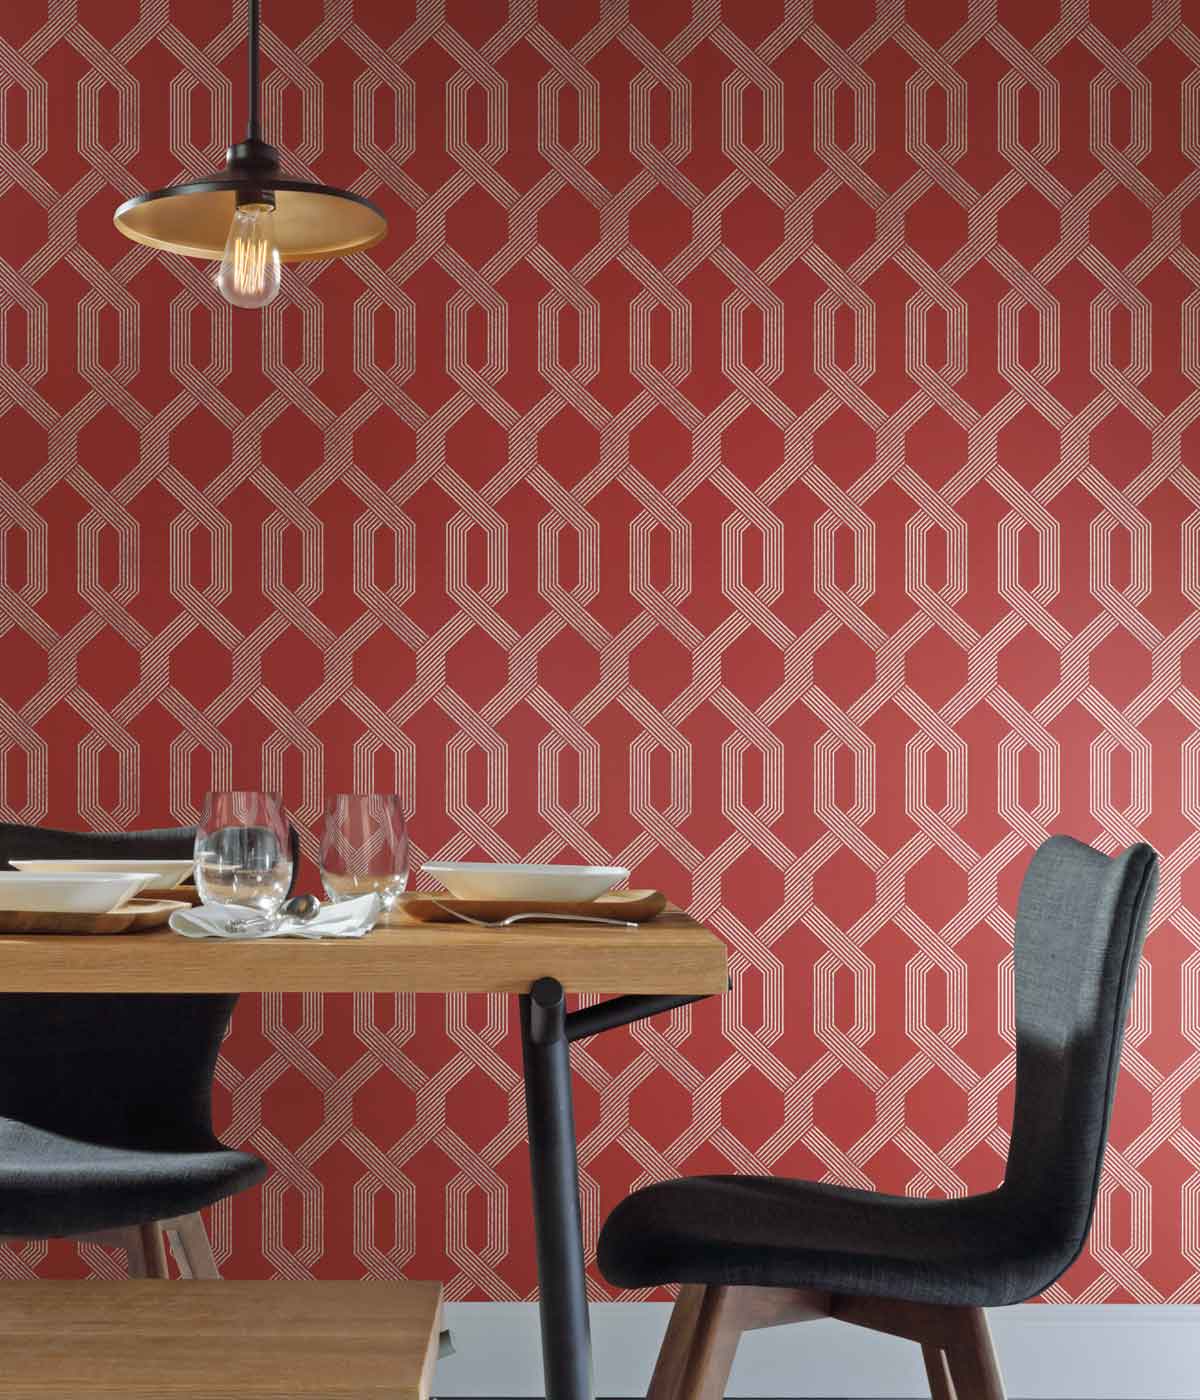 How to Choose A Wallpaper Pattern - Wallpapers To Go